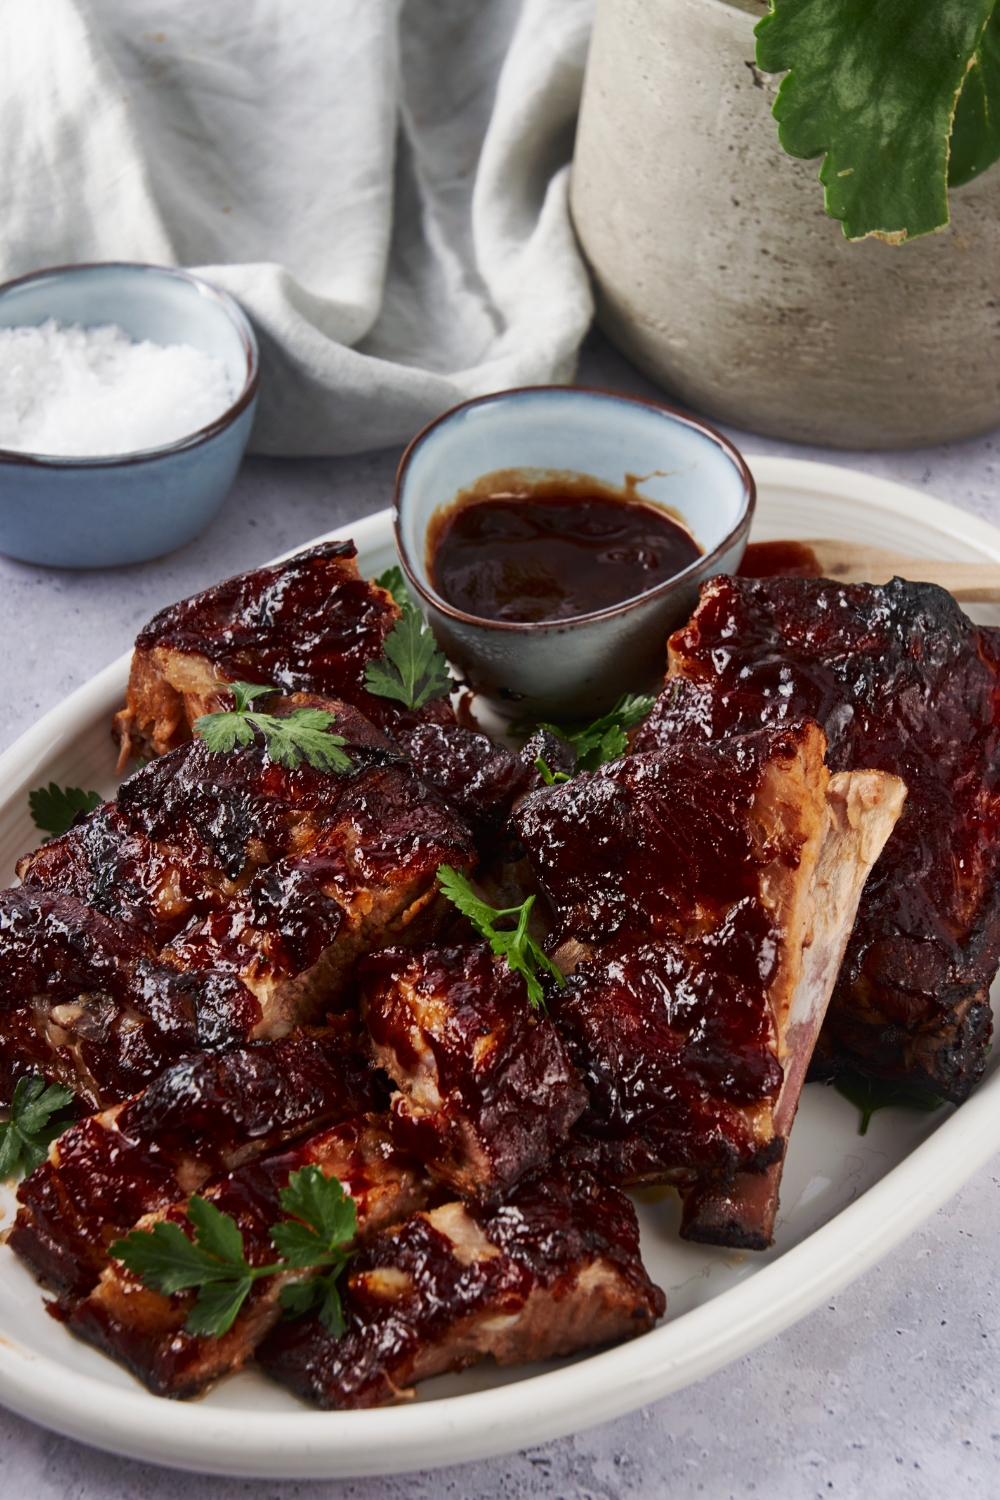 Cooked ribs covered in barbecue sauce piled on top of each other on a white plate, with a side of barbecue sauce on the plate and fresh parsley garnished on top of the ribs.